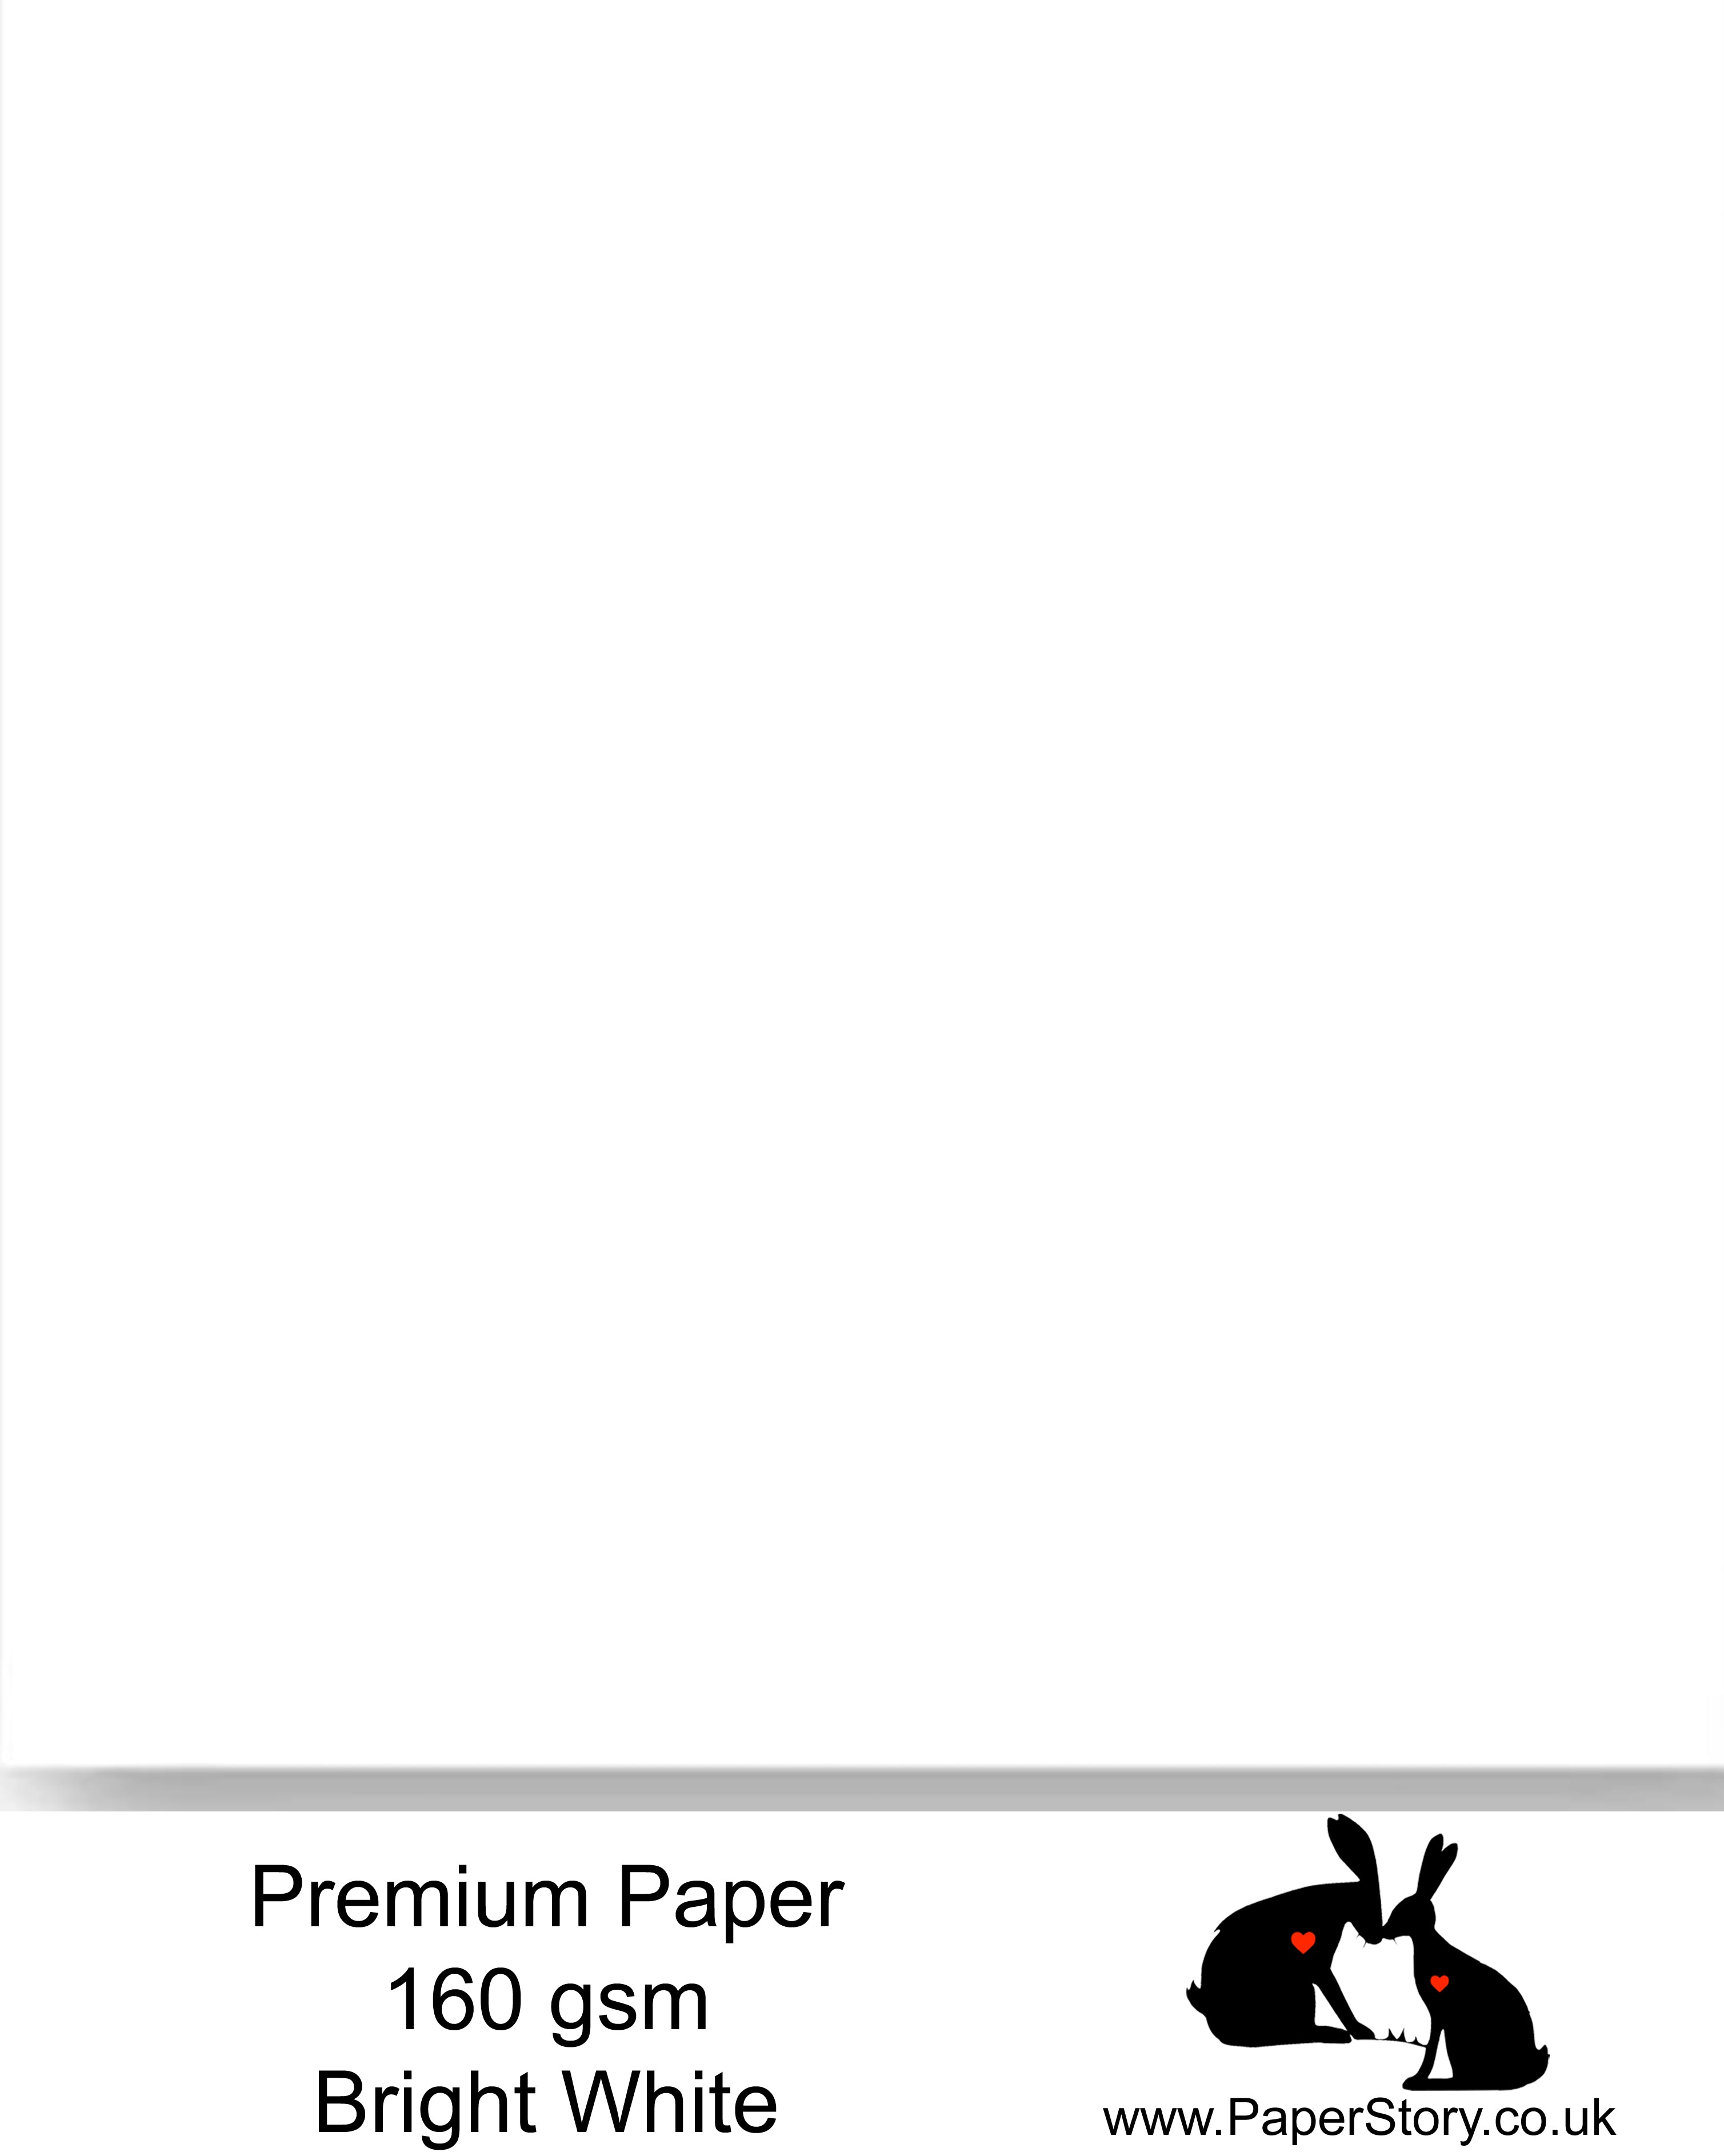 Smooth lightweight bright white 160 gsm paper, a very smooth surface makes this paper perfect for for printing, drawing, crafts and card making 